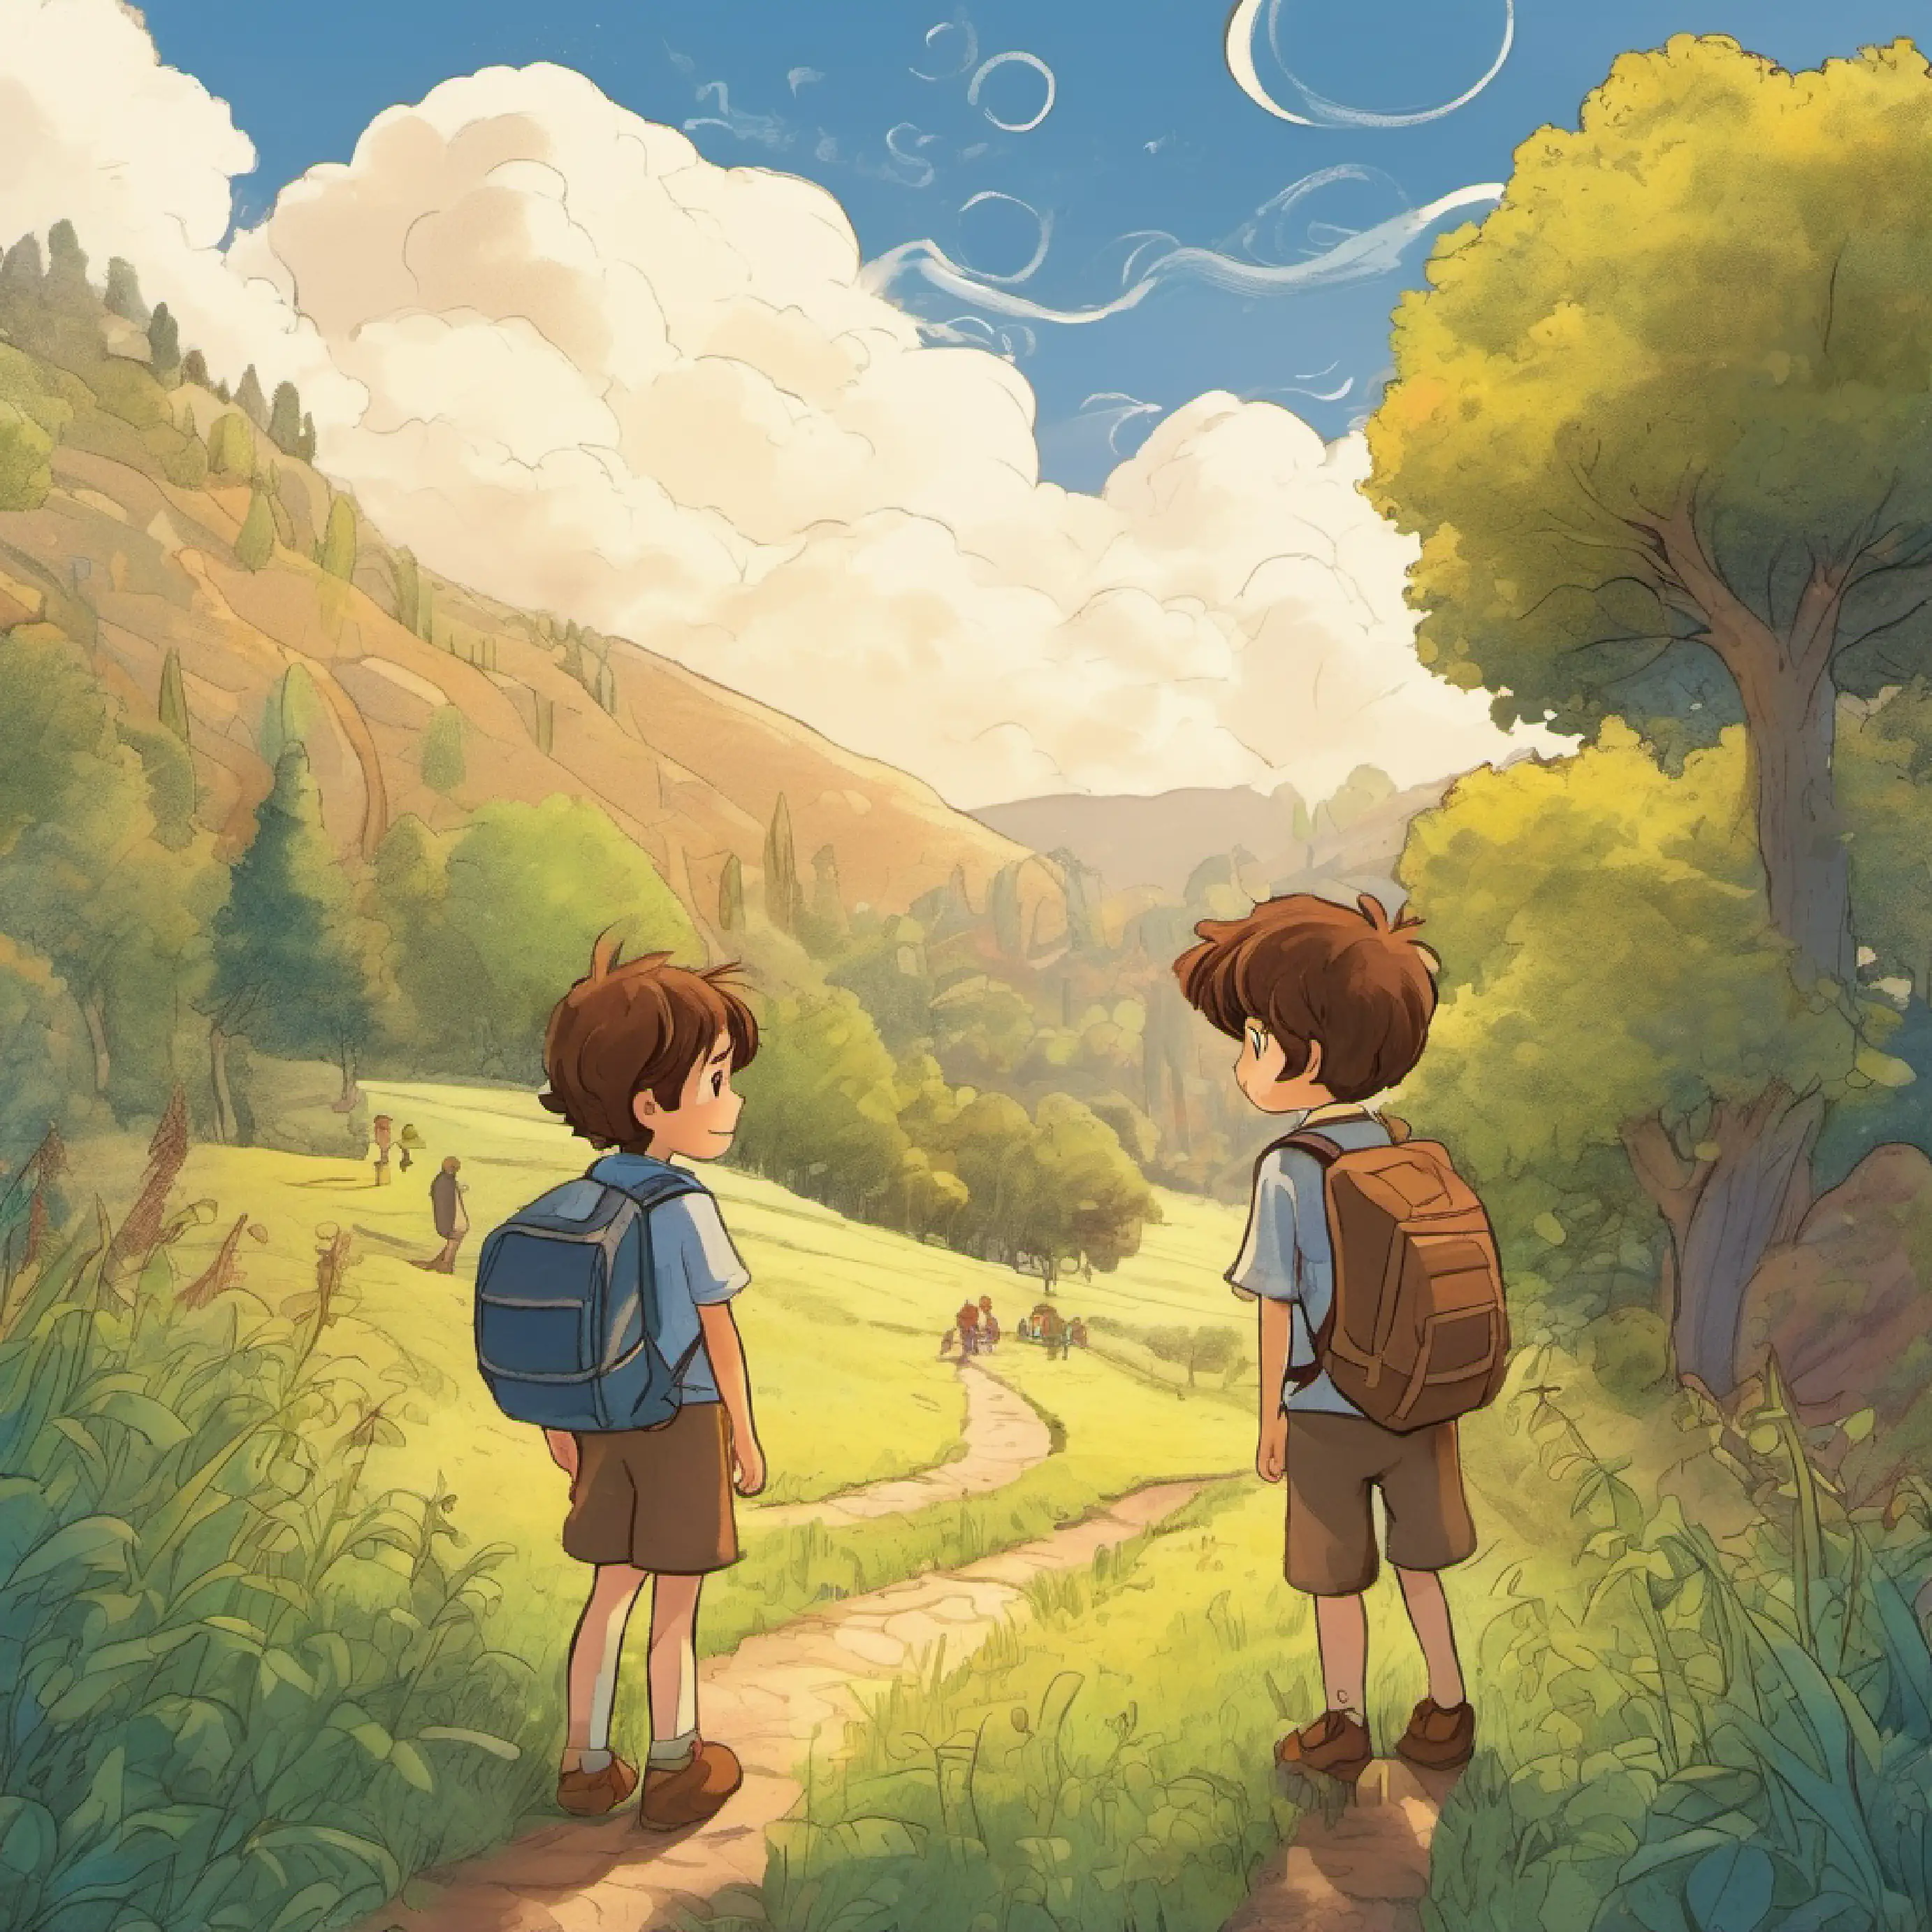 Introduction, Sycamore Grove, 7-year-old boy, thoughtful hazel eyes, messy brown hair and friends under skies of adventure